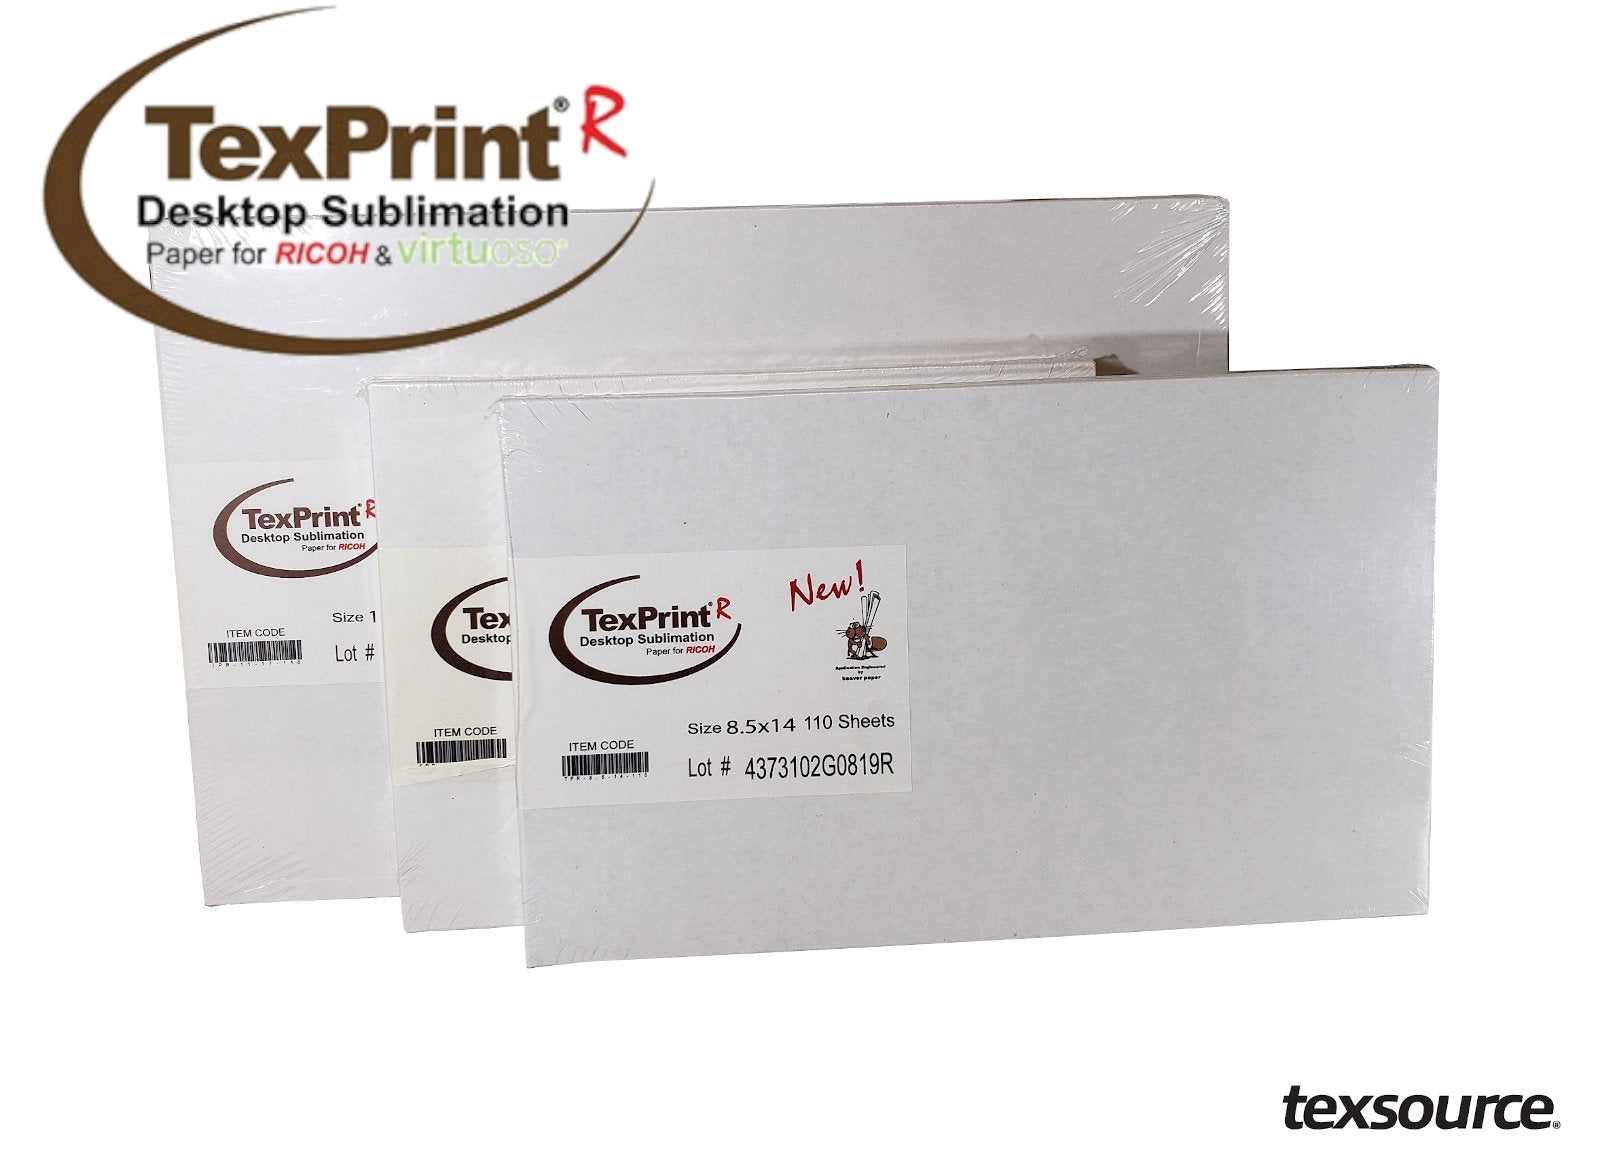 13x19 Beaver TexPrint DT R Heavy Sublimation Heat Transfer Paper For  Ricoh Printers - 110 sheets